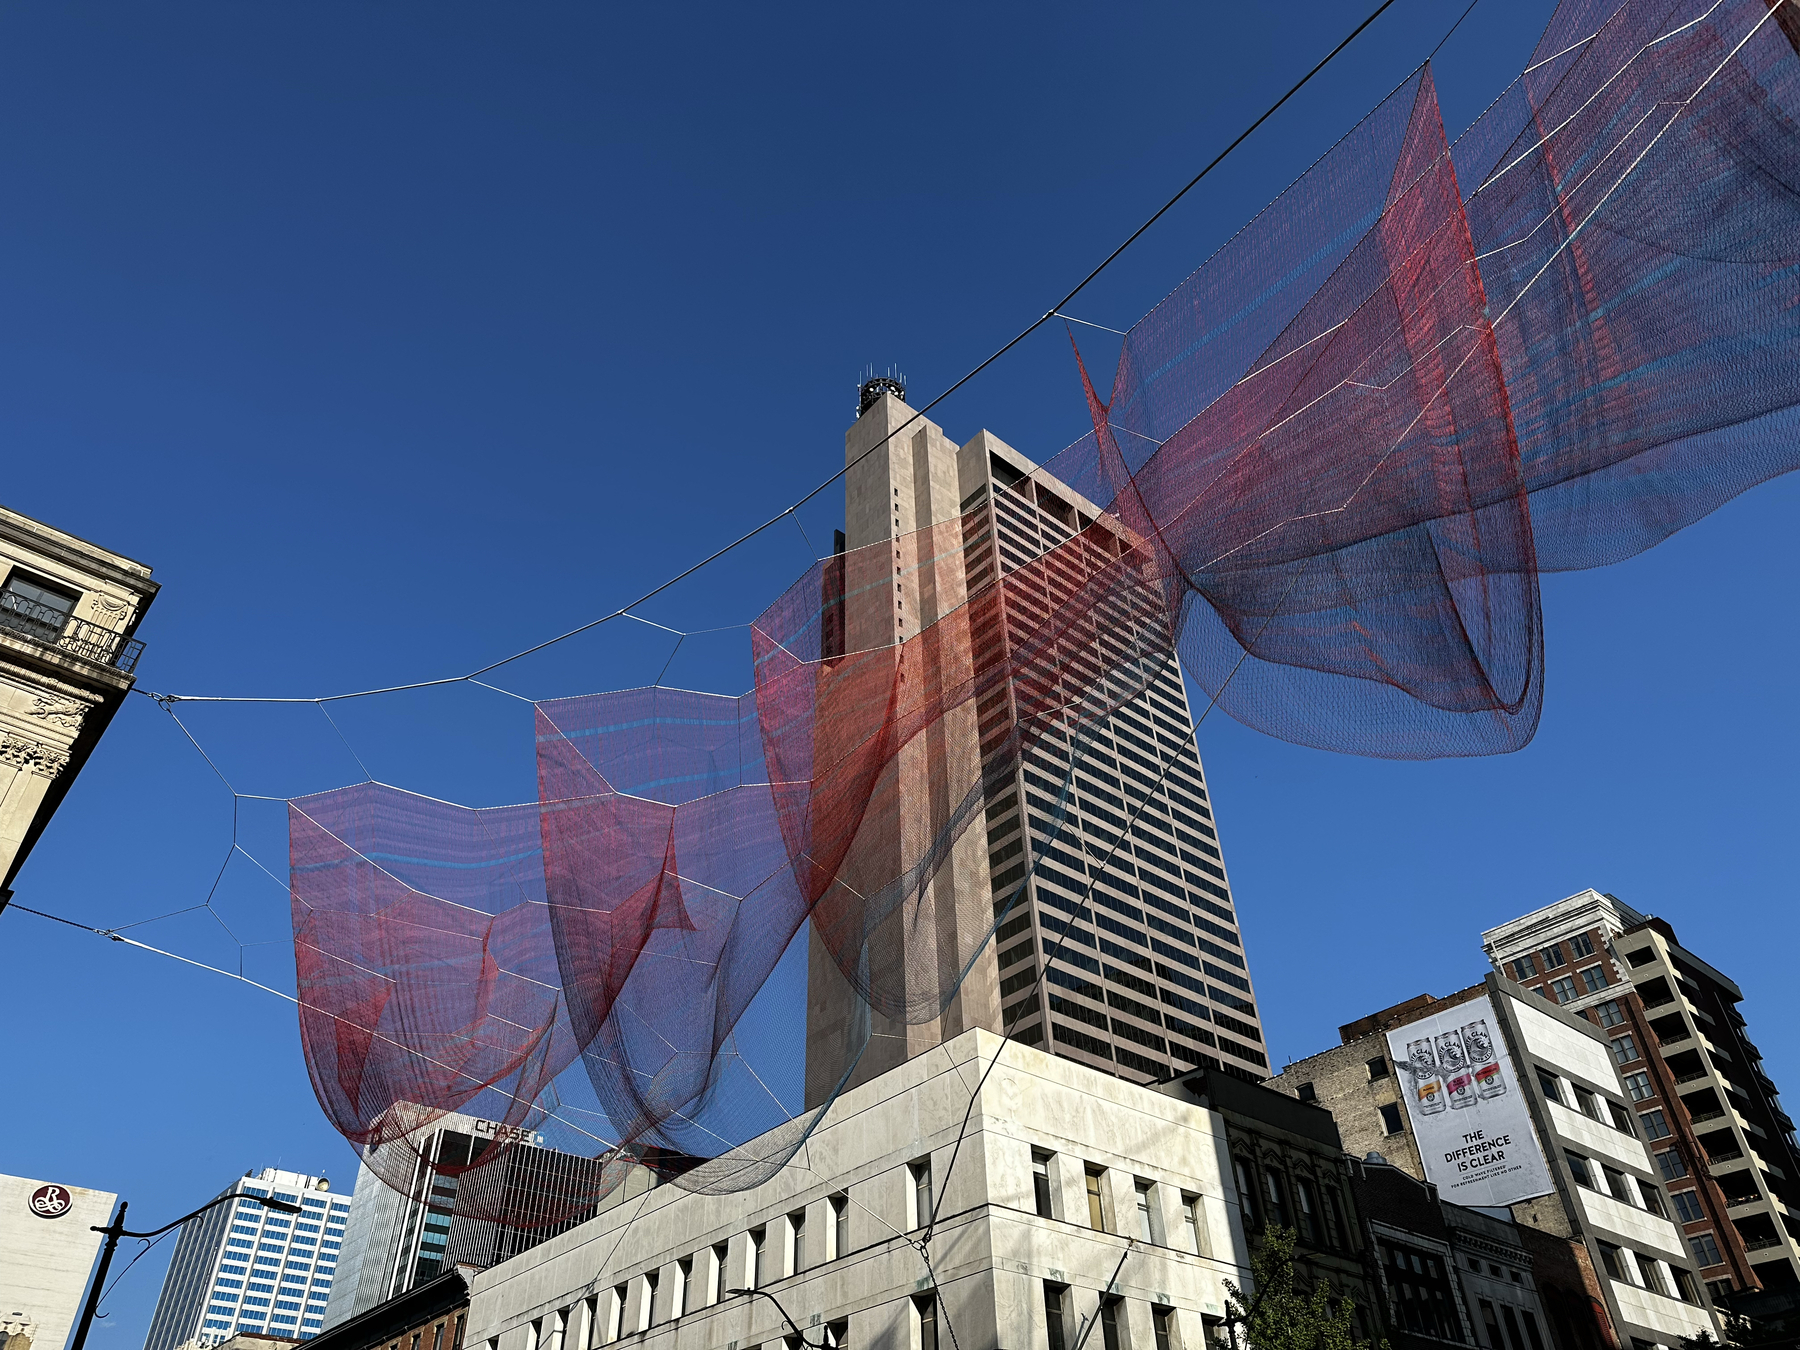 Red and blue netting twisted together against the backdrop of a clear sky and the city behind.